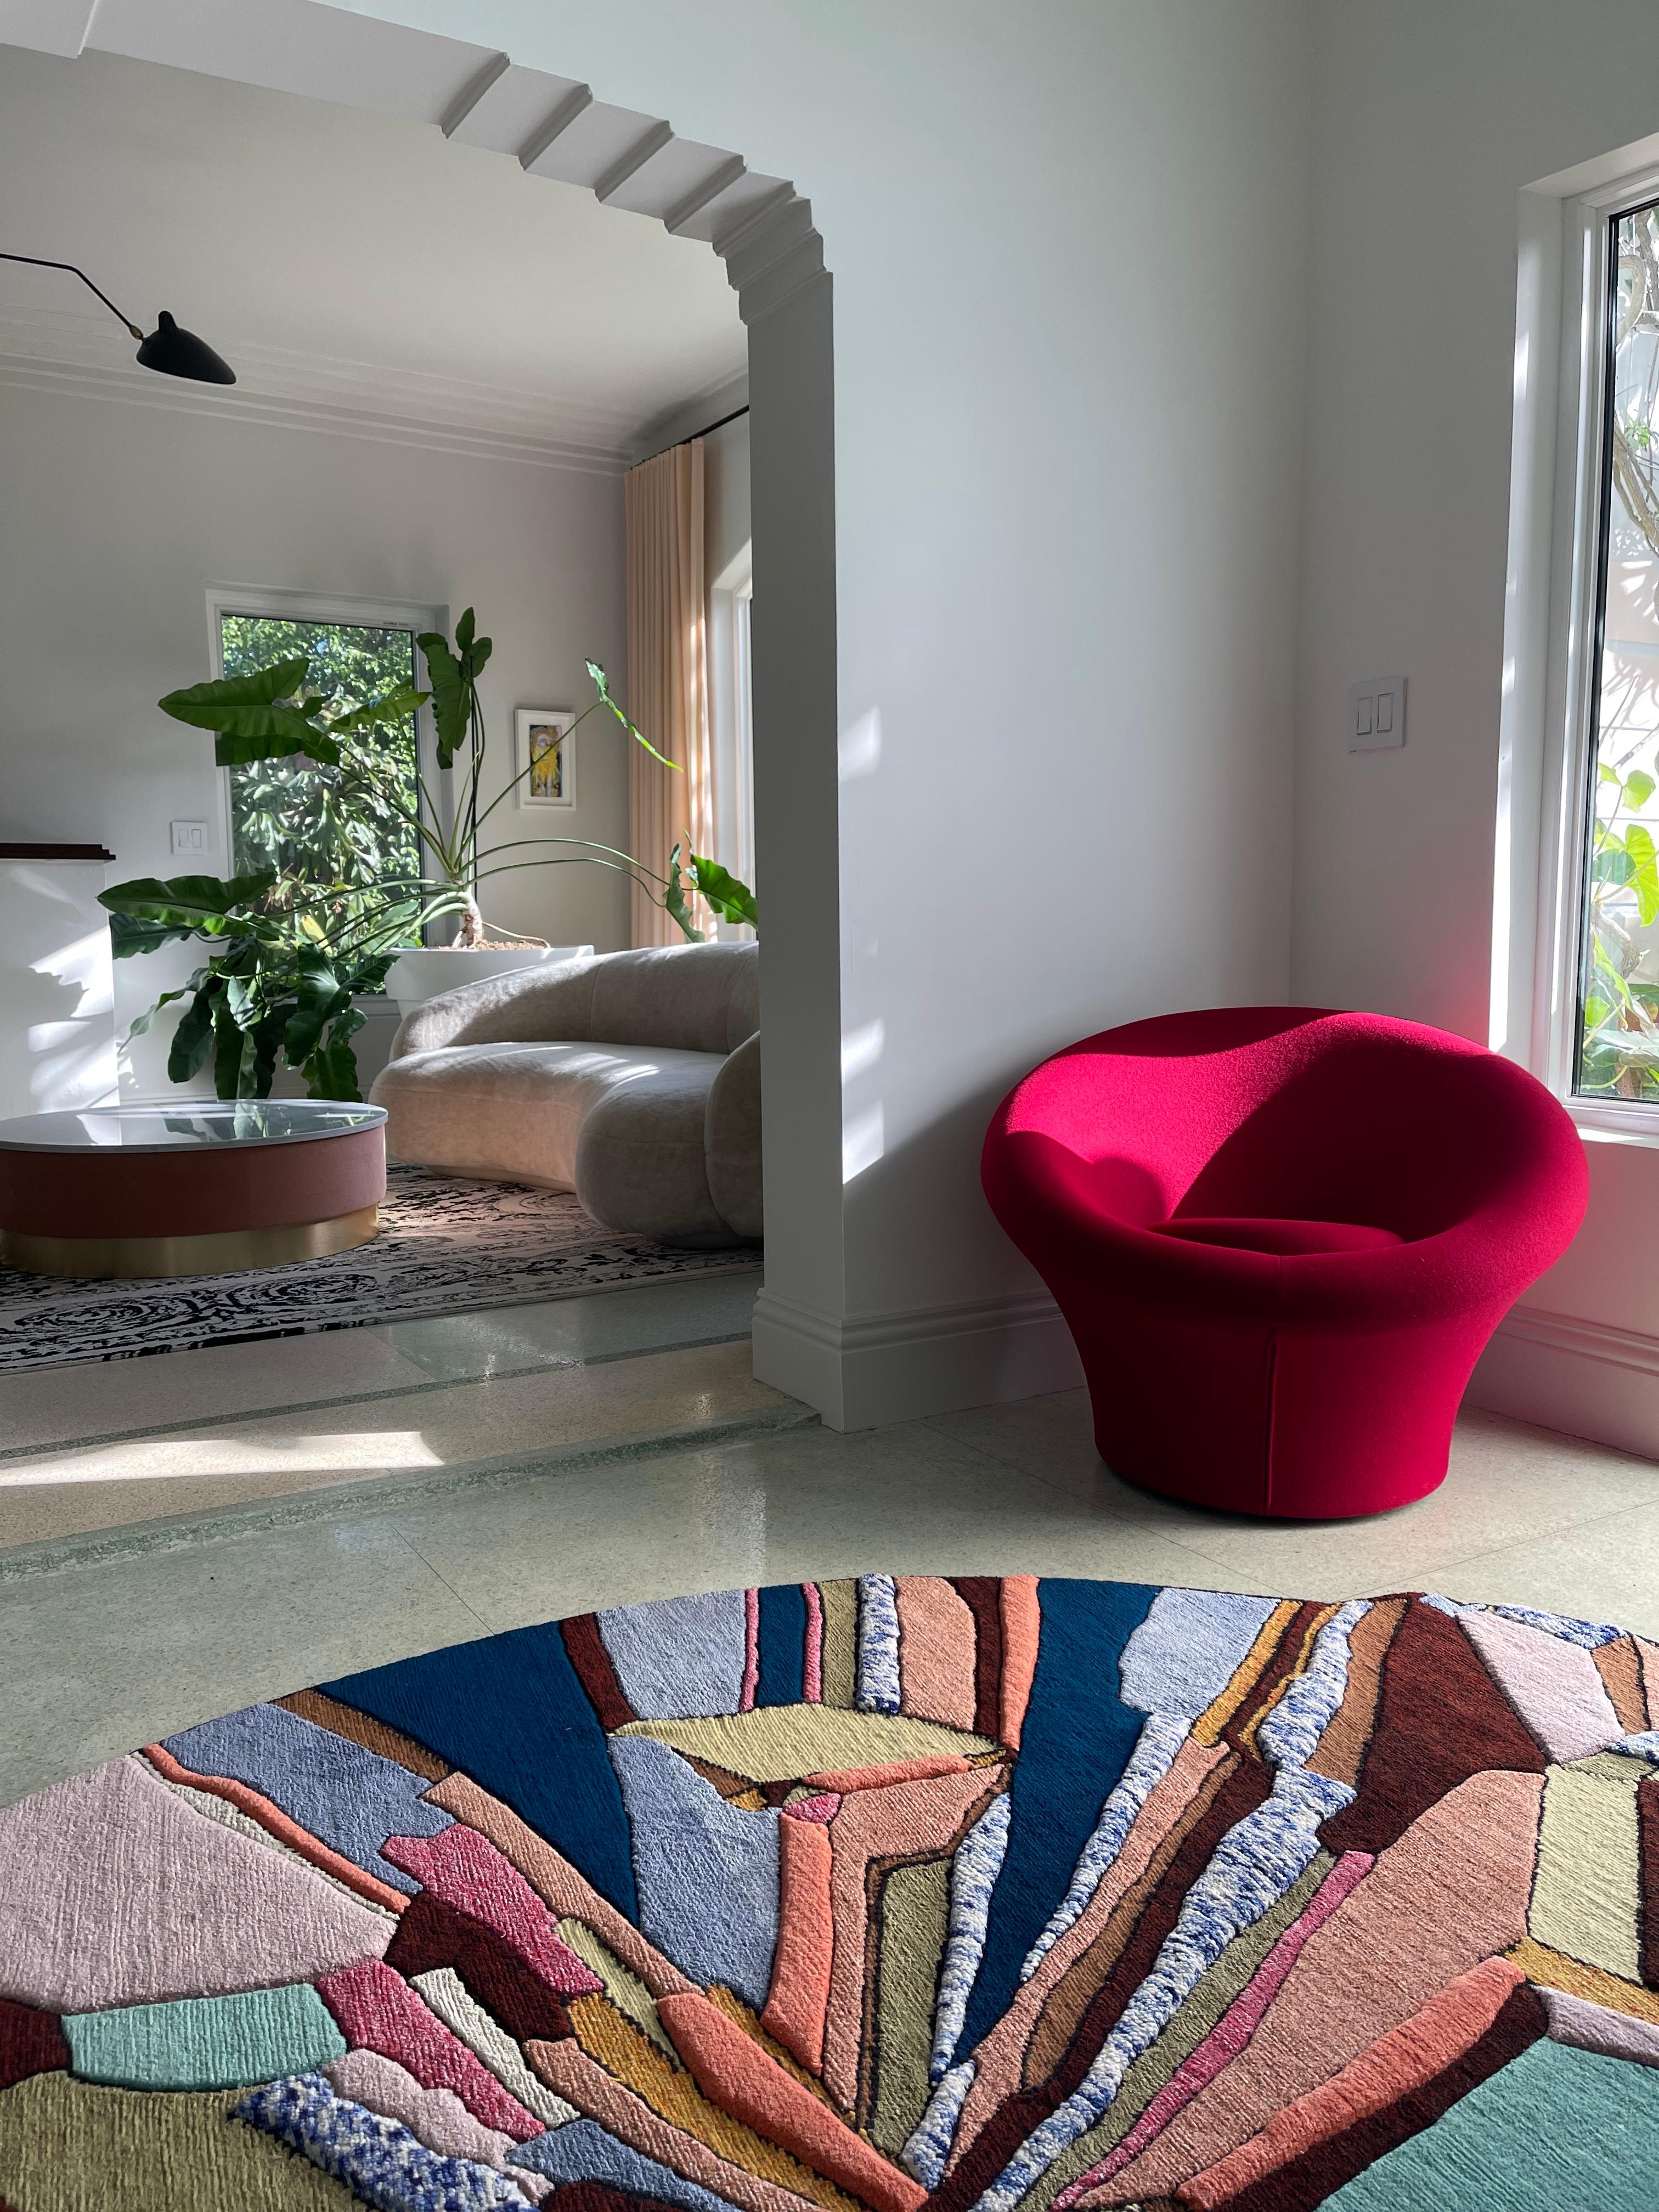 Mushroom chair
In Tonus 4 Color 609 - color of the fabric in the second image
+ Felt Gliders
The Mushroom armchair is one of the world’s most famous designs. Designer Pierre Paulin distinguished himself with this armchair in the original shape,